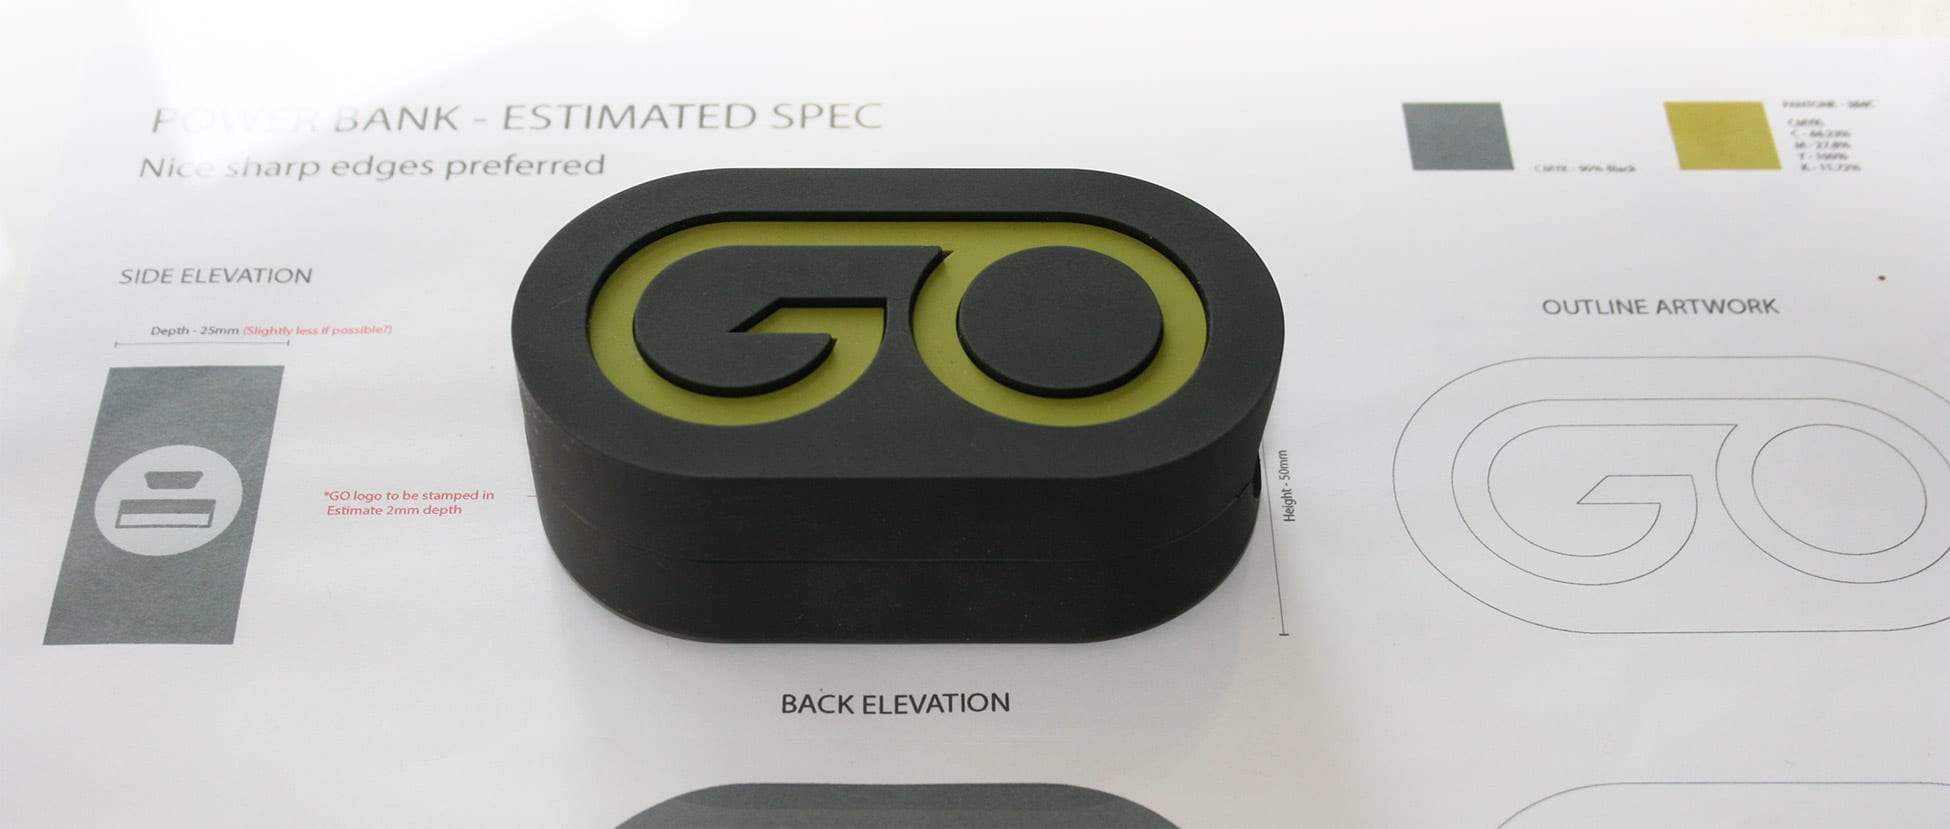 Mike-Garland-GO-Group-PowerBank-Plans